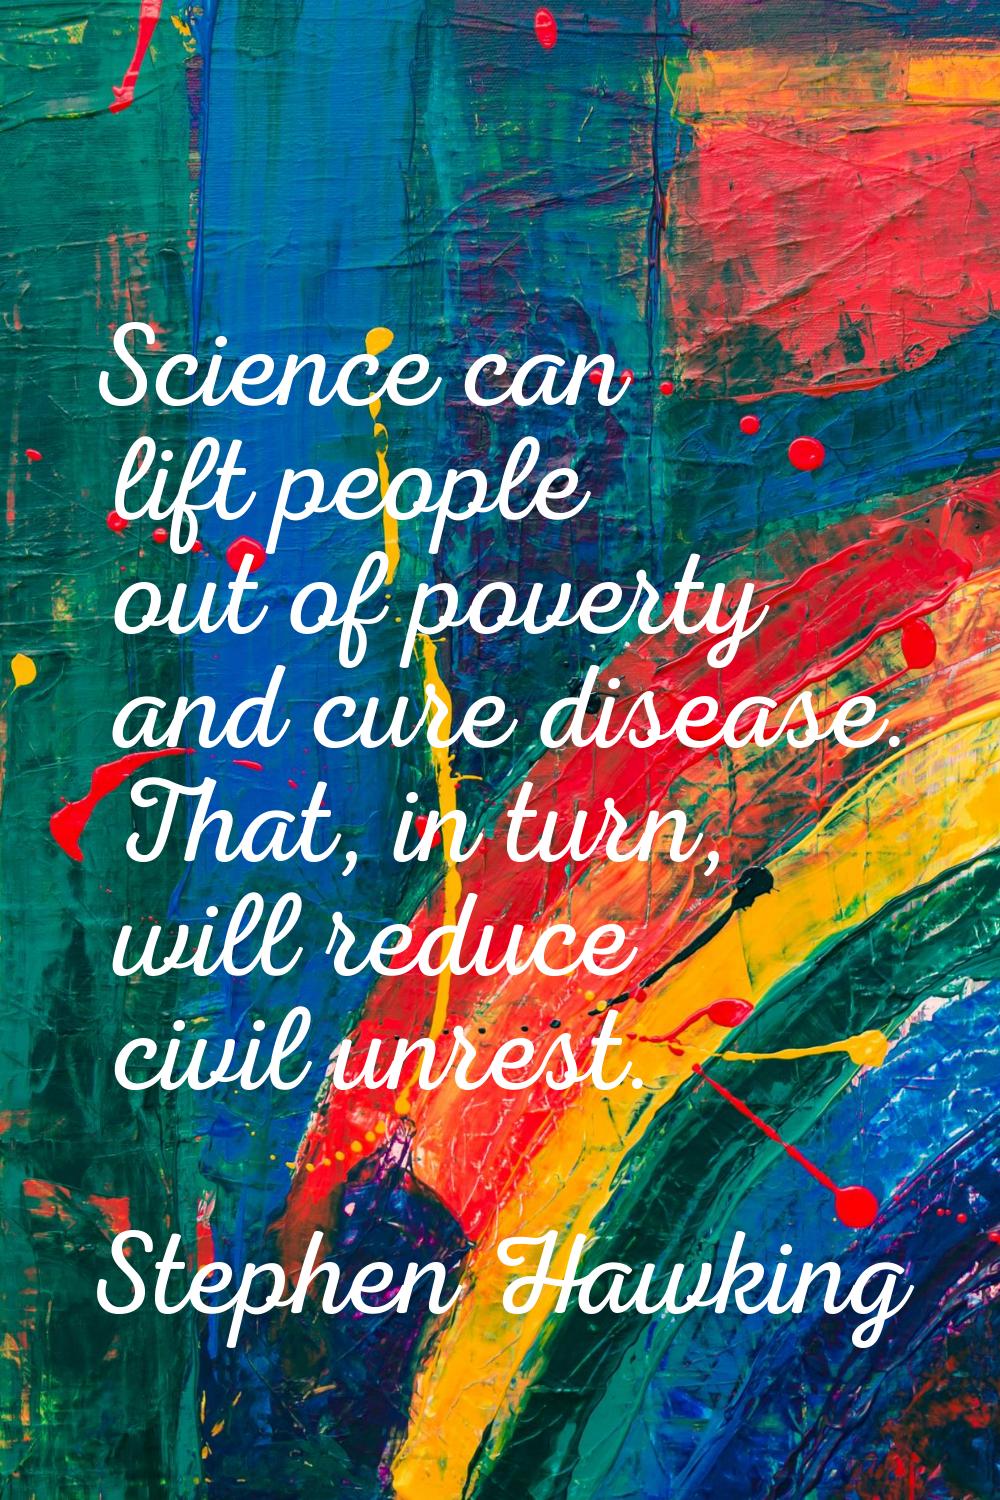 Science can lift people out of poverty and cure disease. That, in turn, will reduce civil unrest.